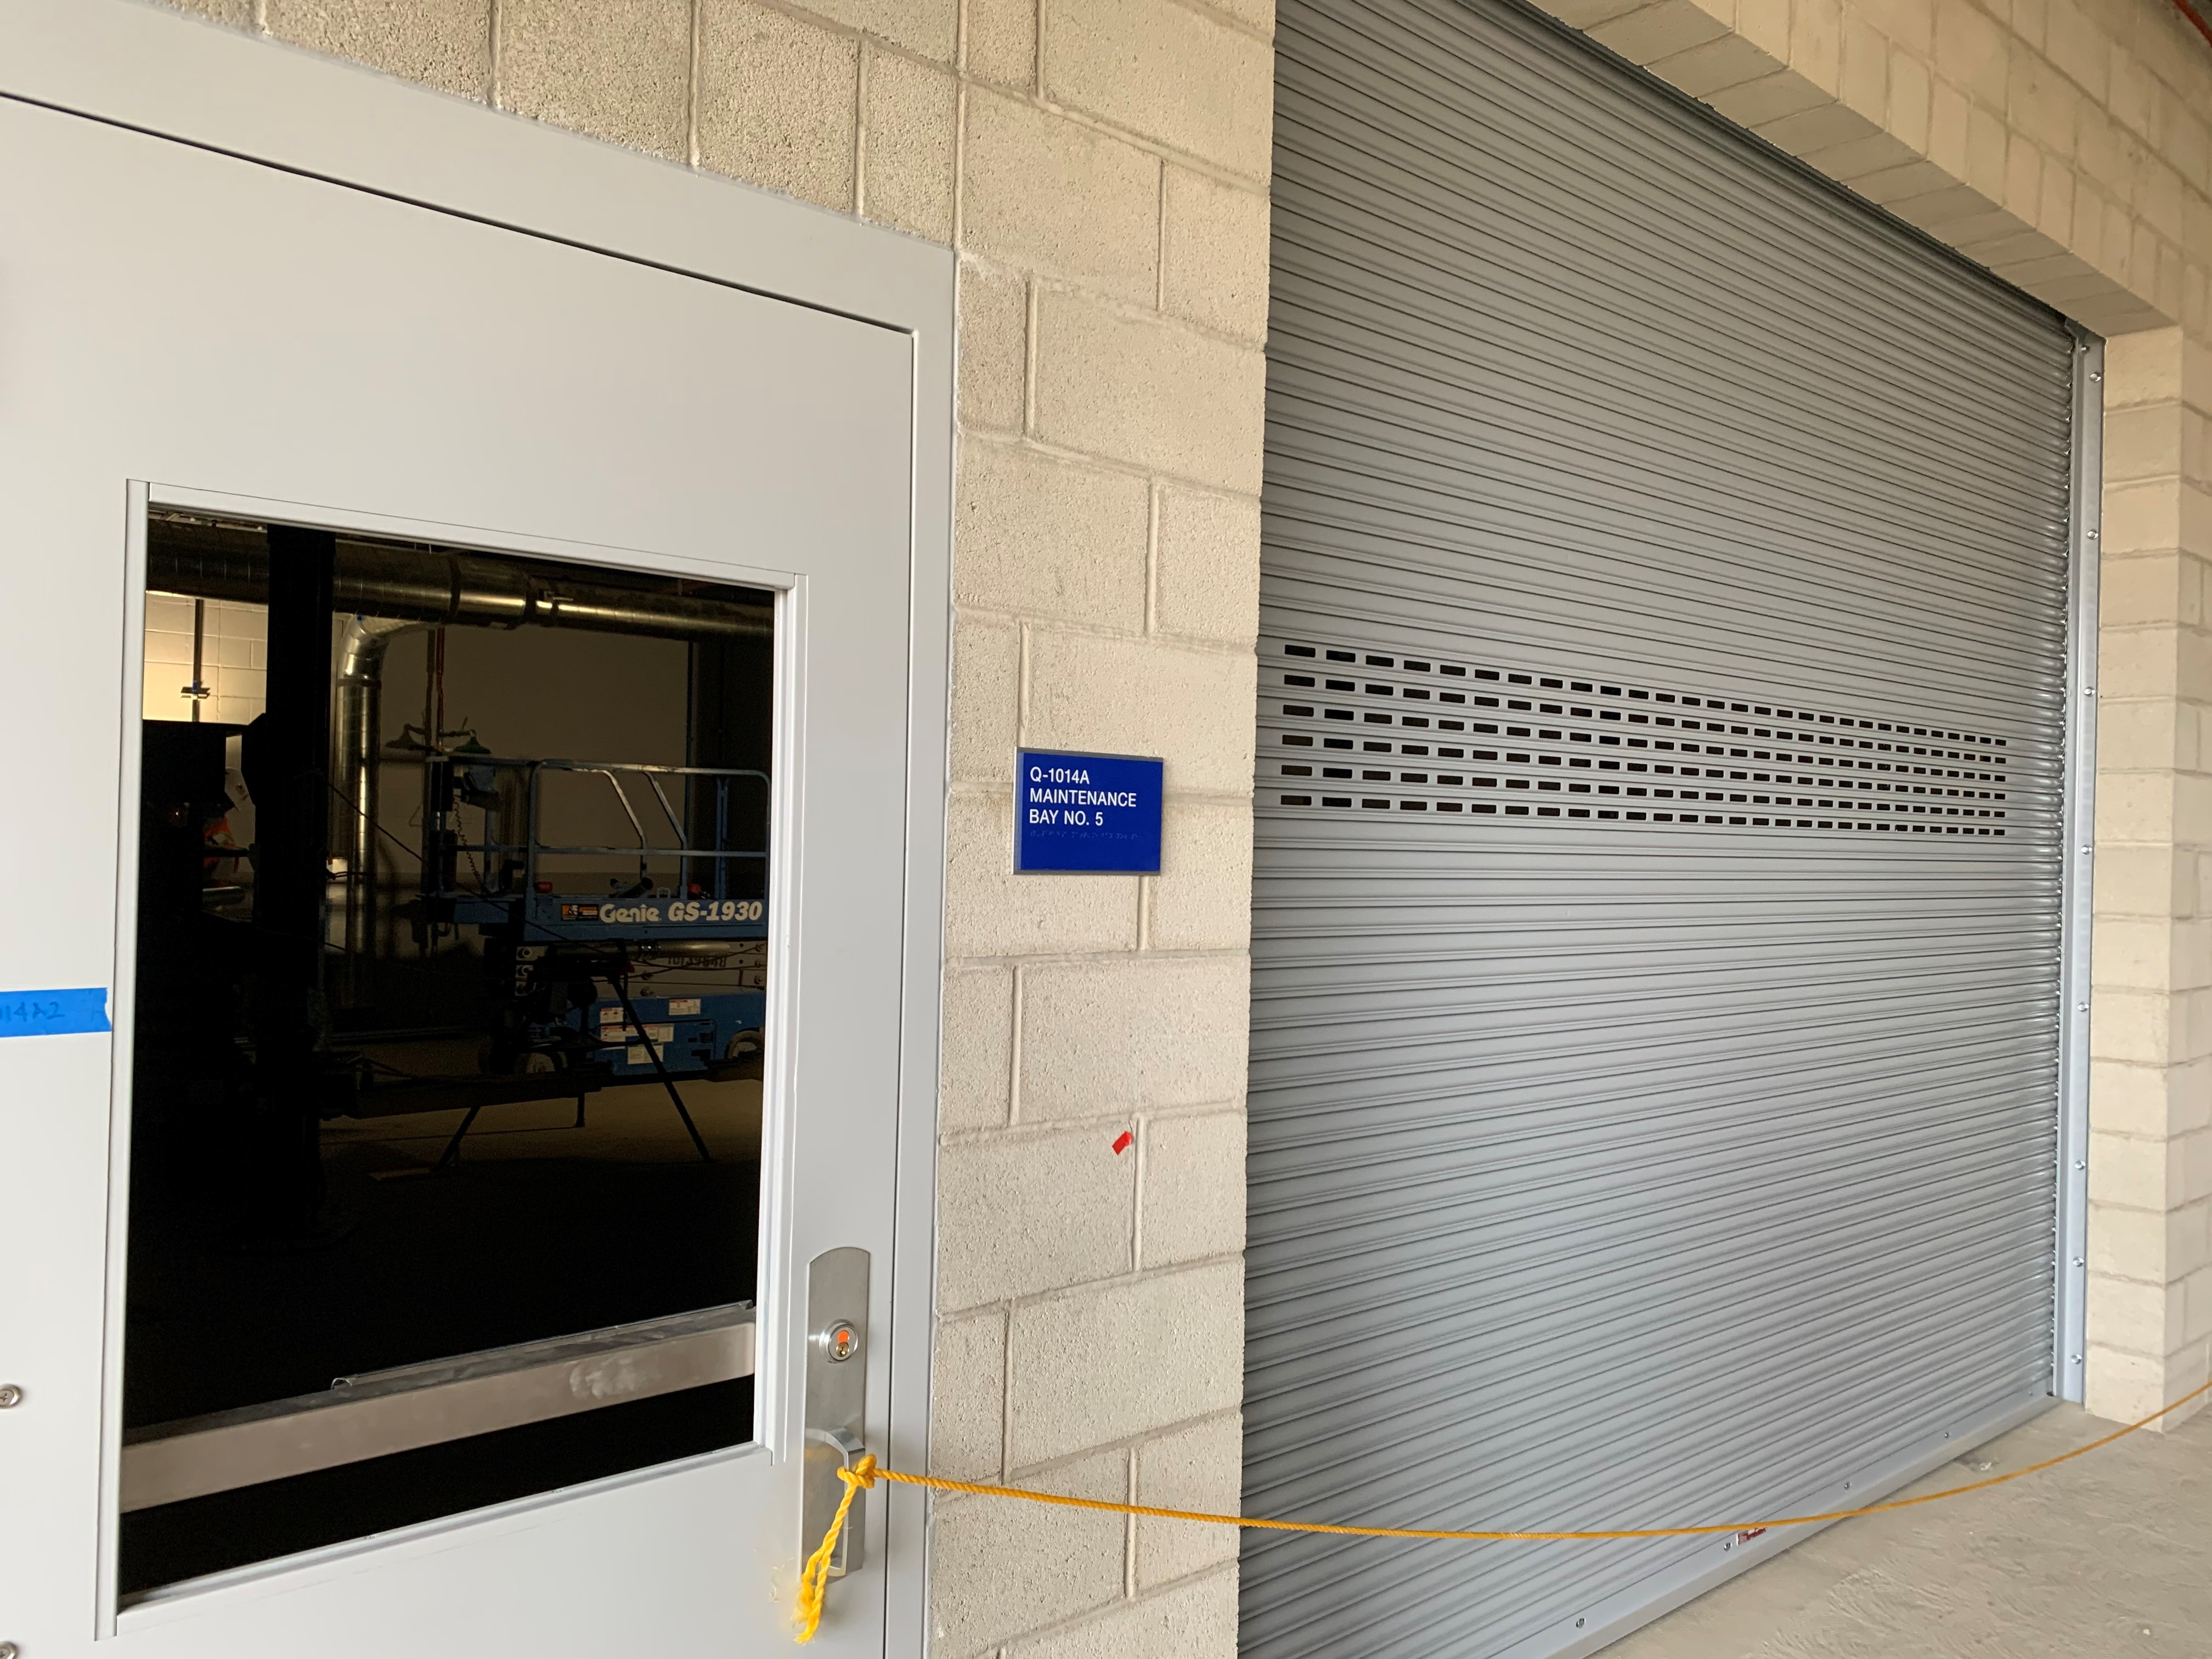 Quick Turn Around (QTA) maintenance bay door at the Consolidated Rent-A-Car (ConRAC) facility.